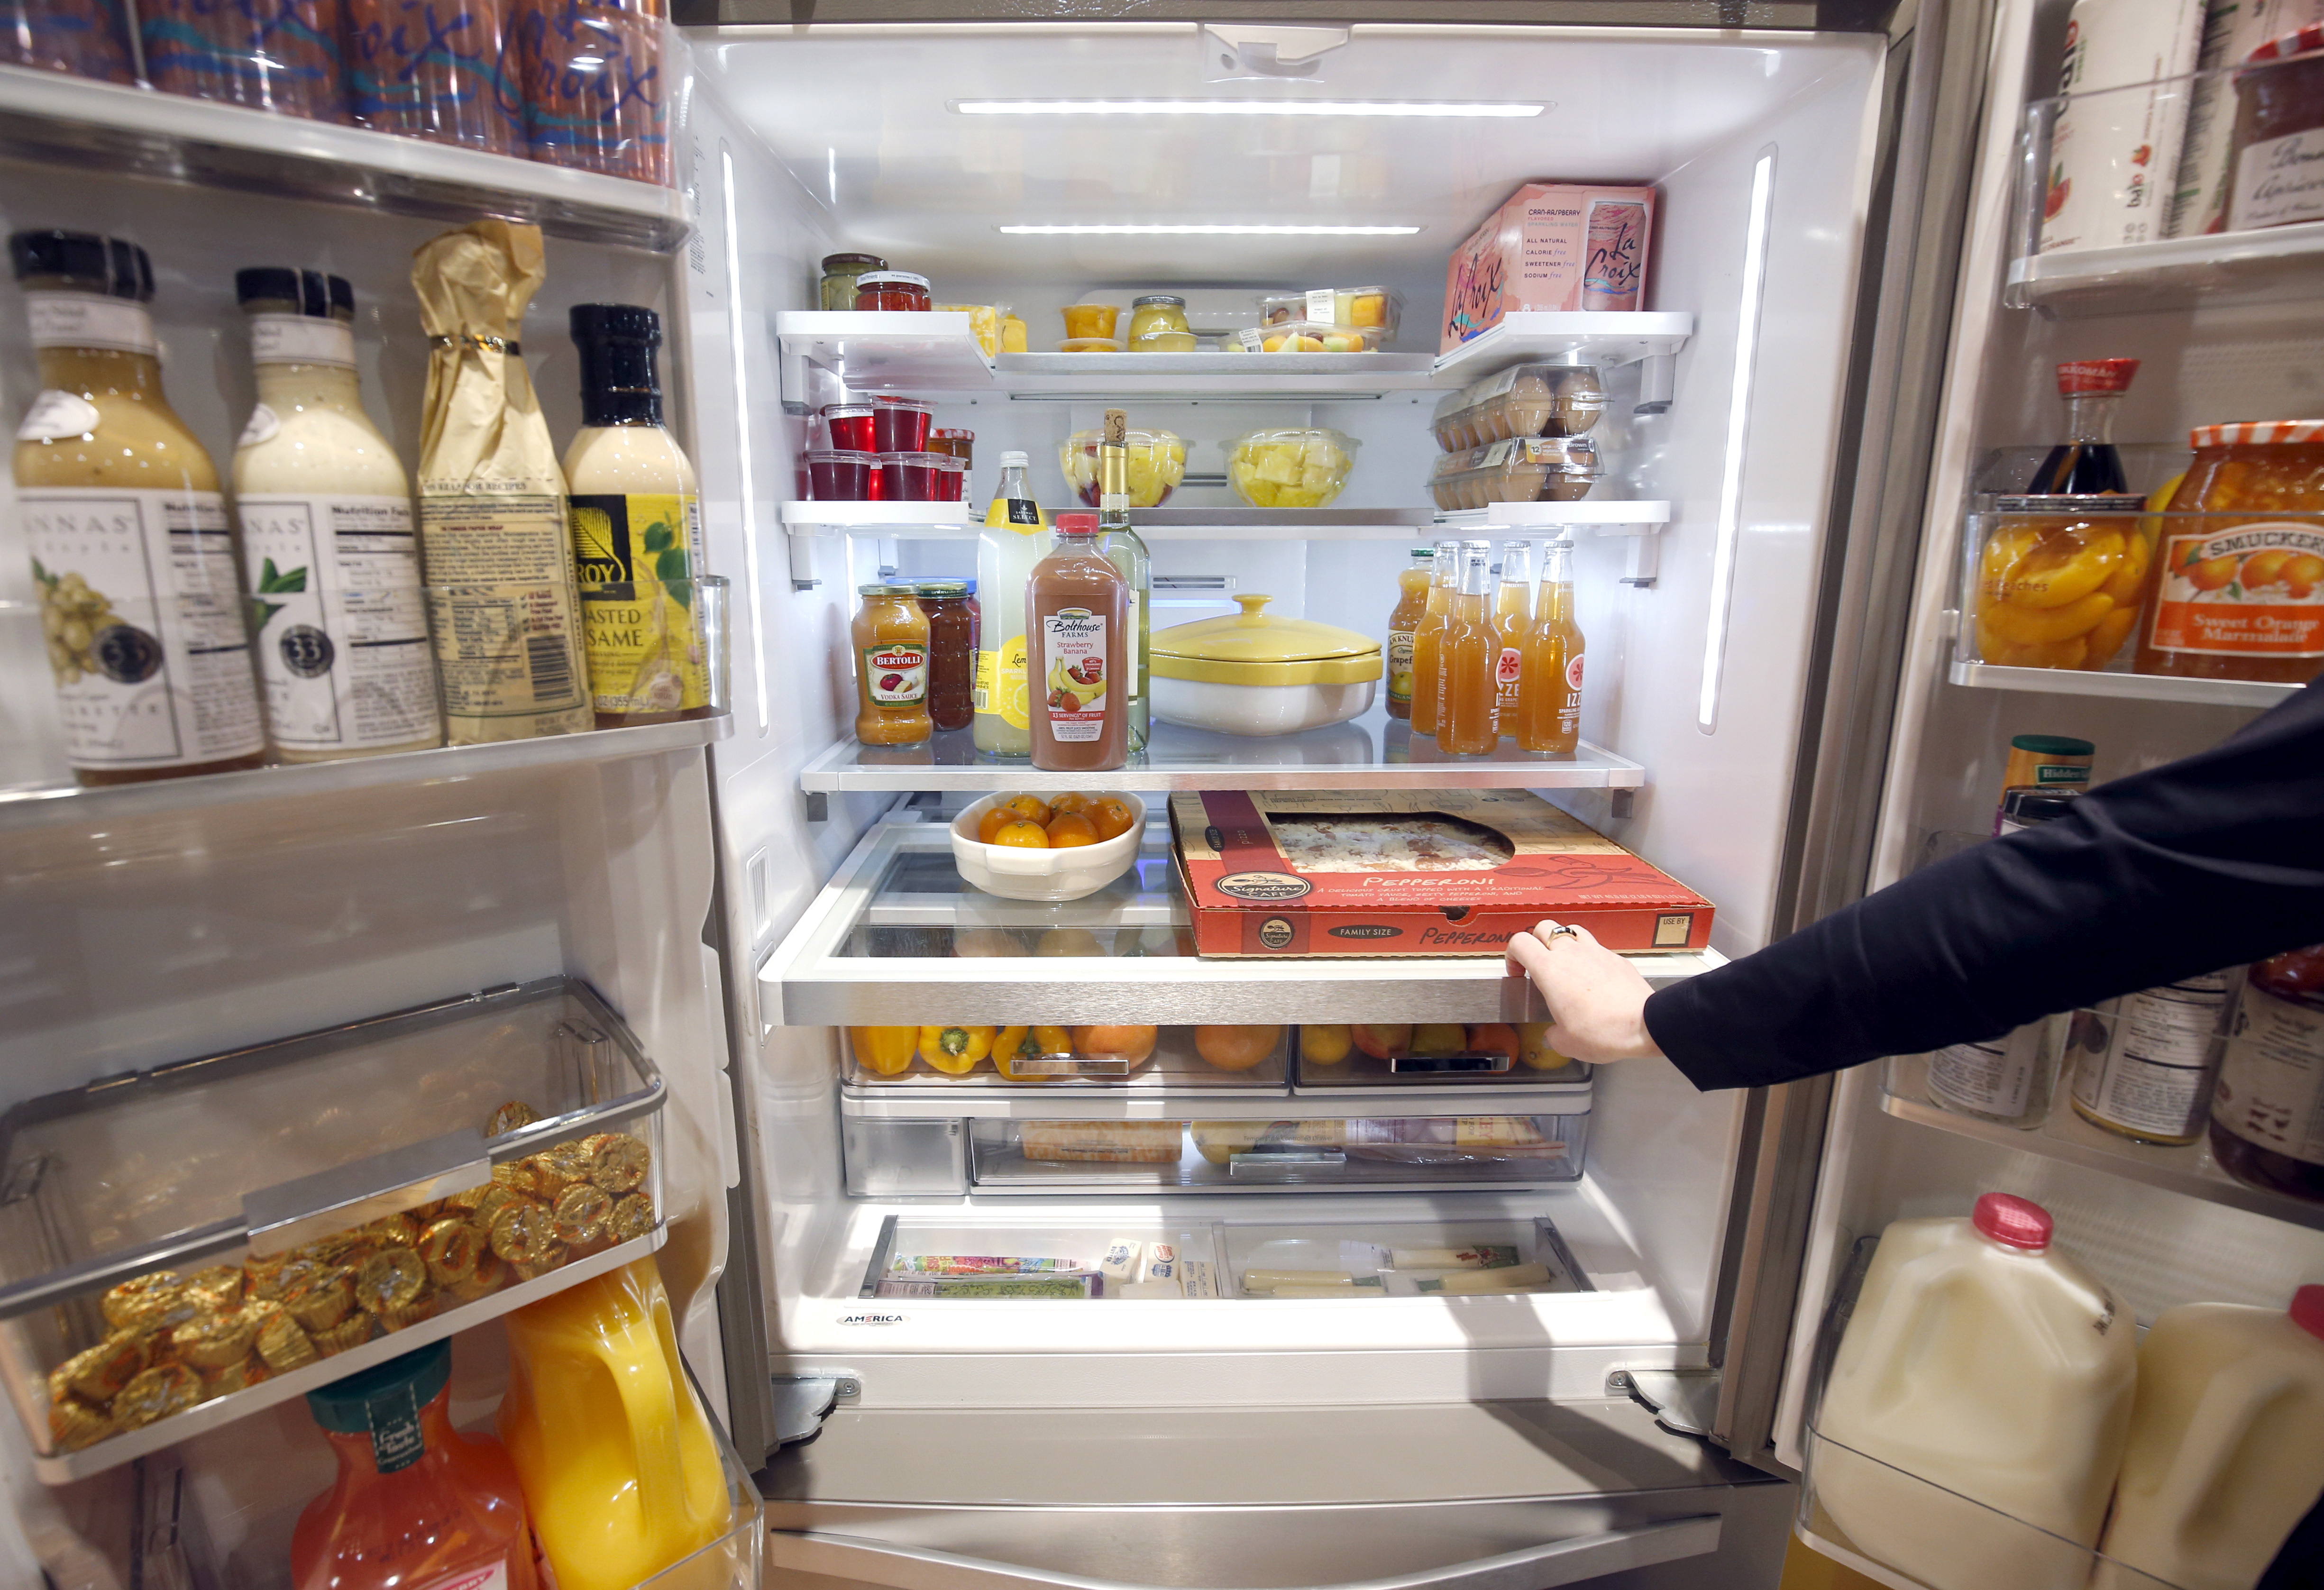 A Whirlpool French Door refrigerator is shown during the 2016 CES trade show in Las Vegas